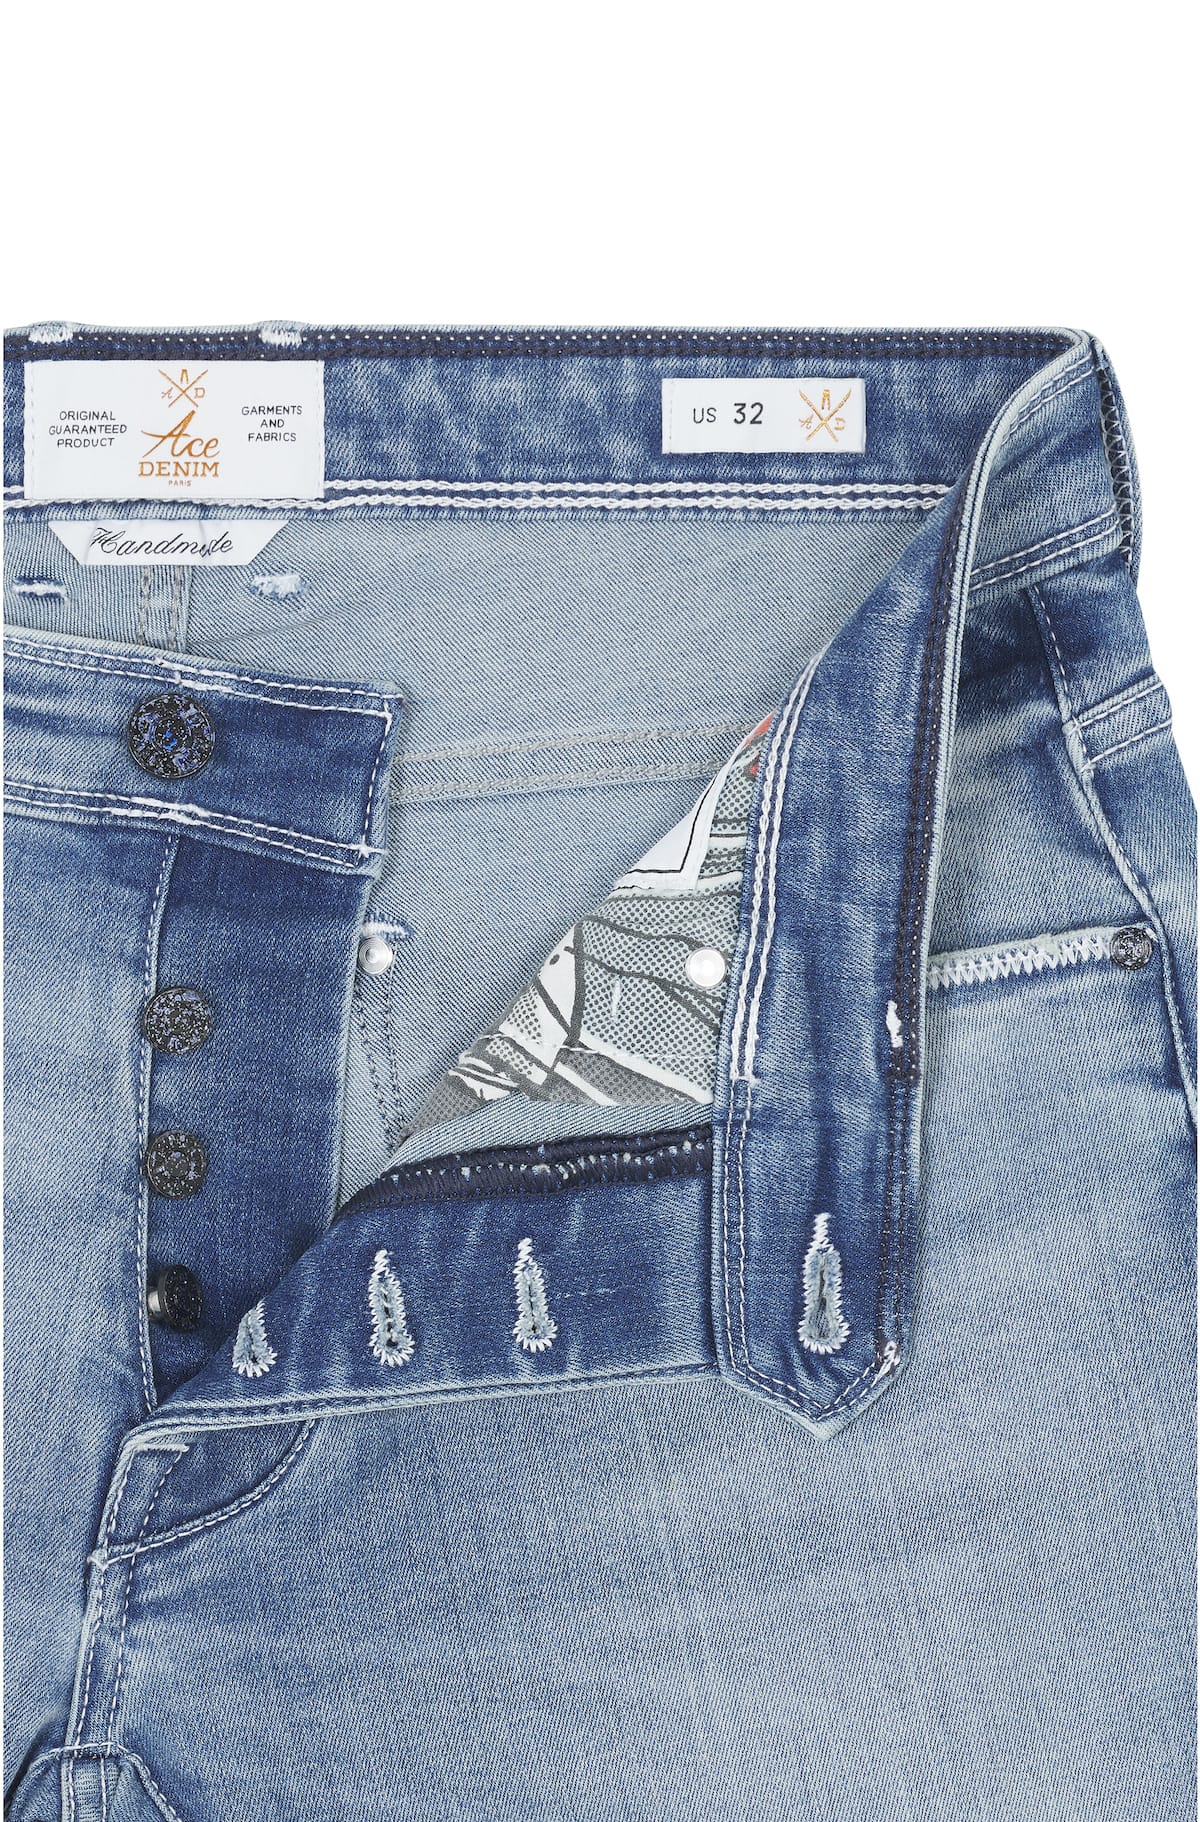 AD 05 Denim - Extra Bleached/ White